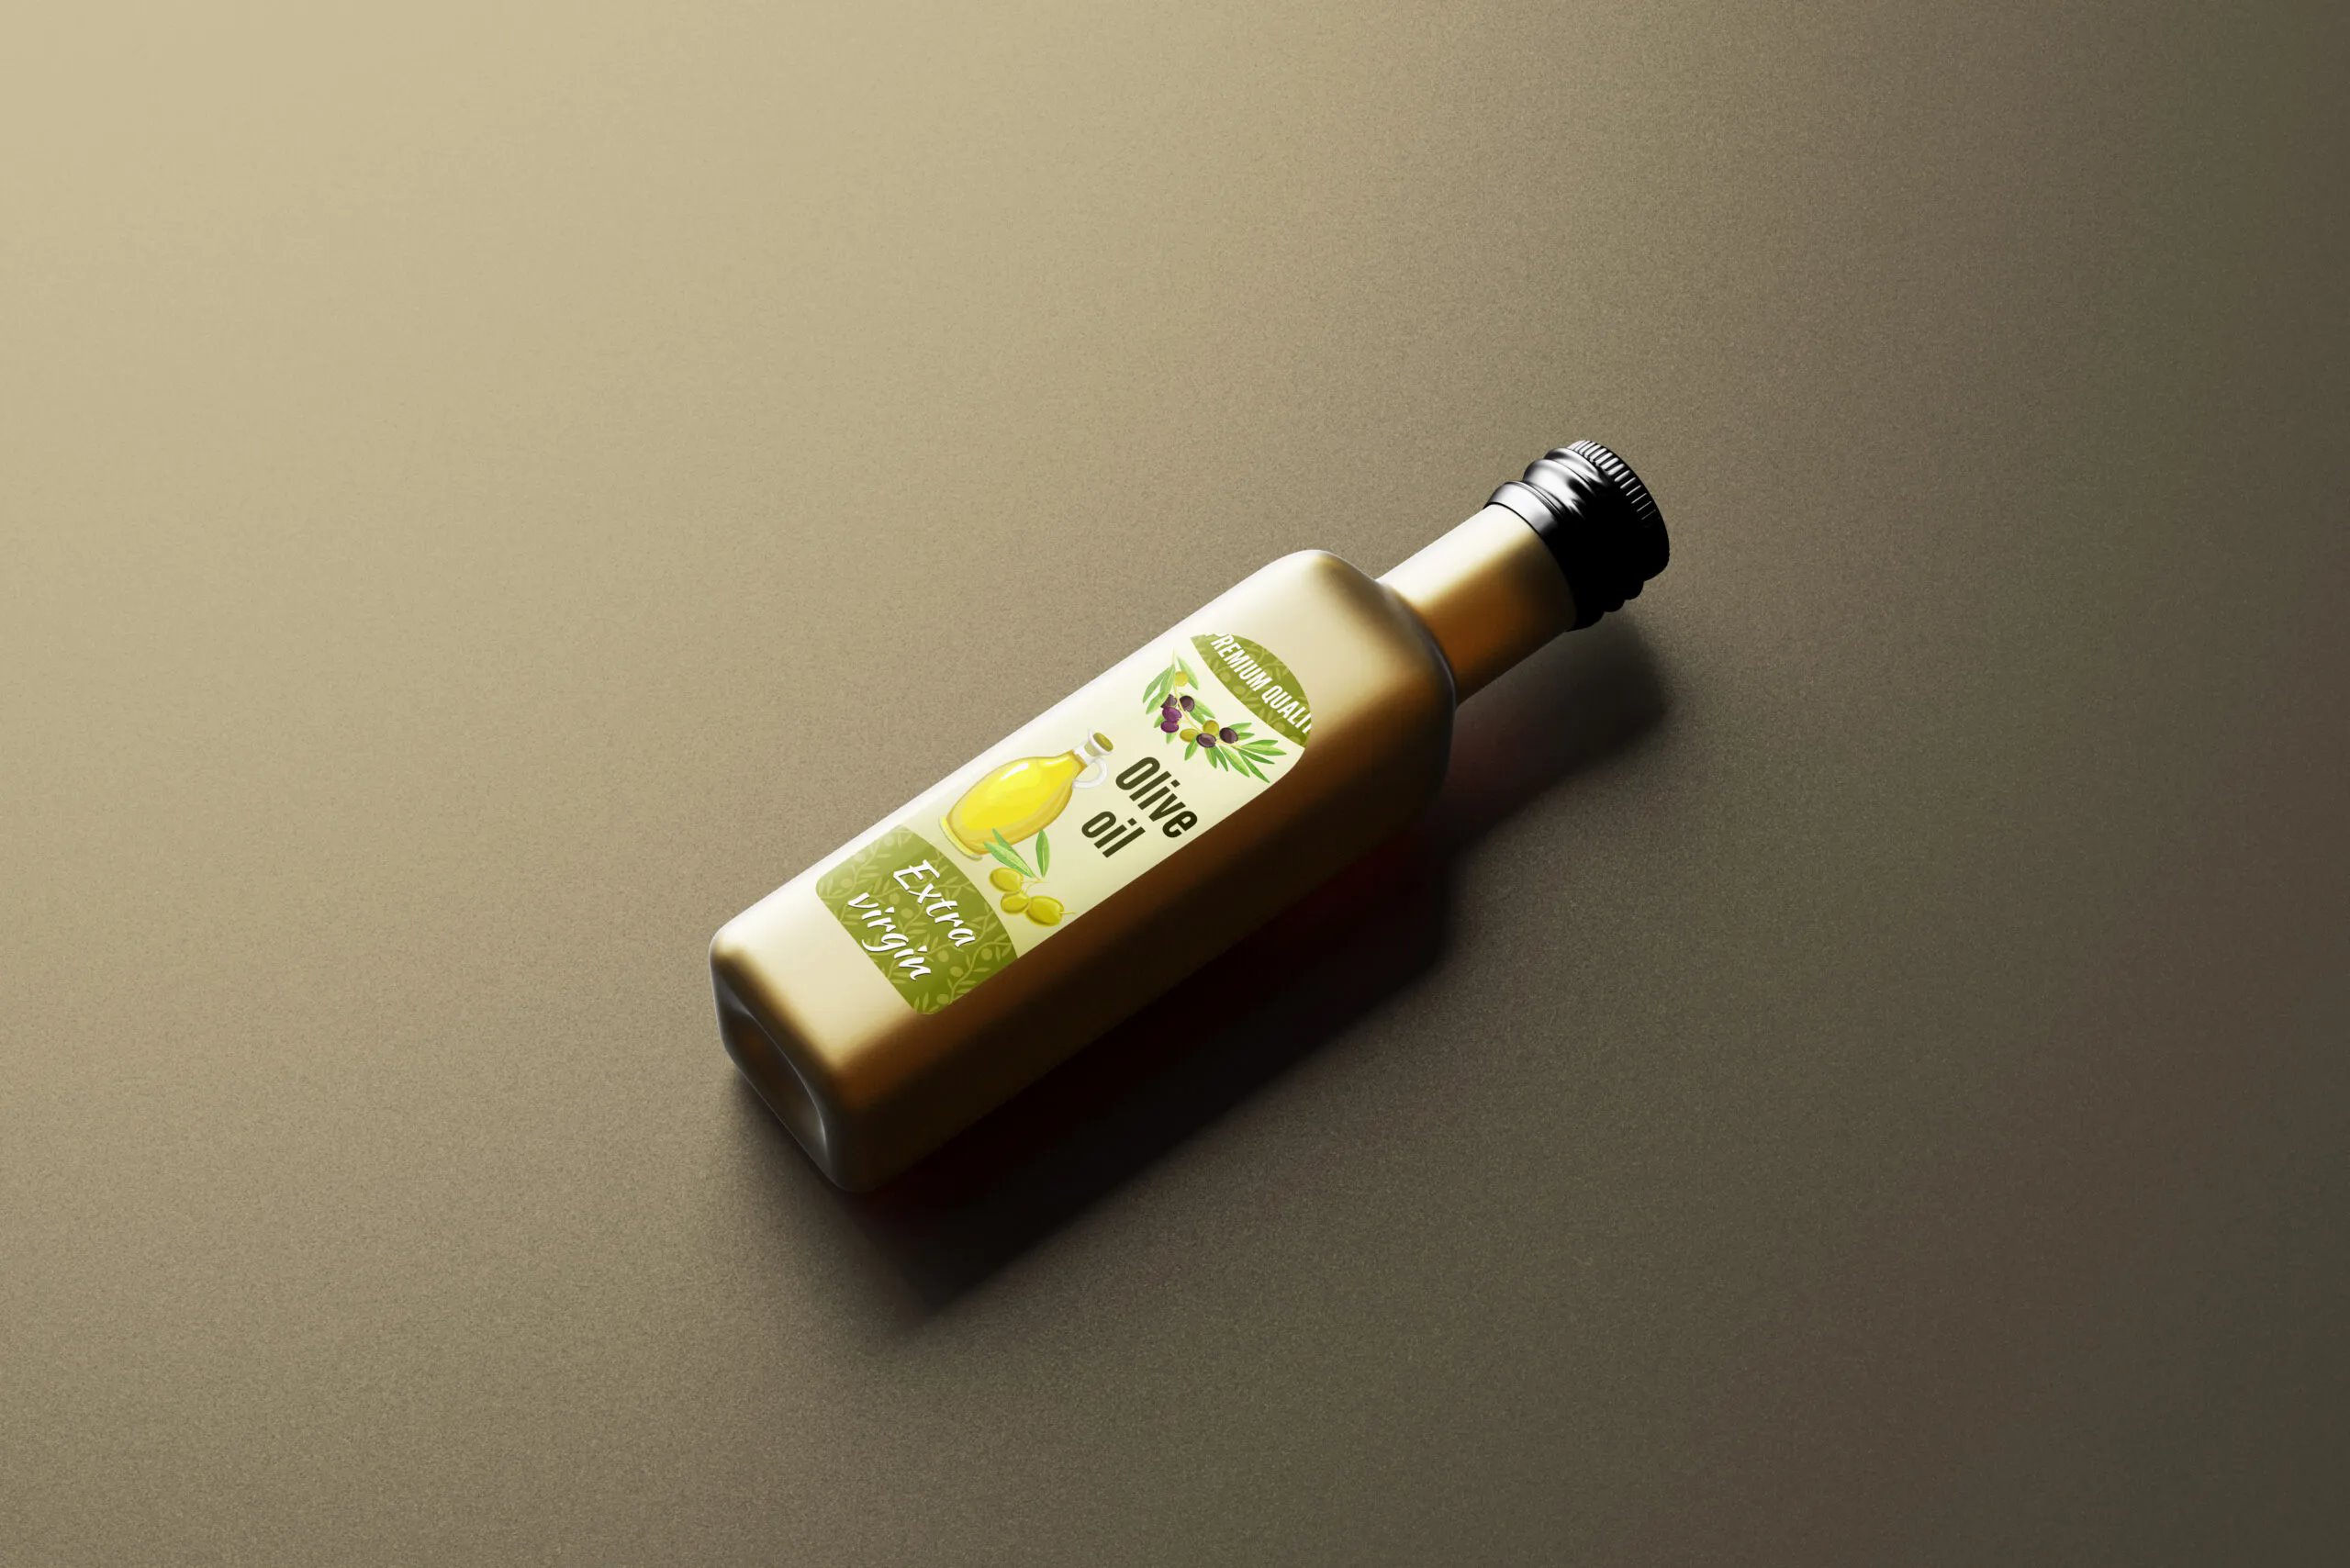 5 Square Cooking Oil Bottle Mockups in Varied Sights FREE PSD